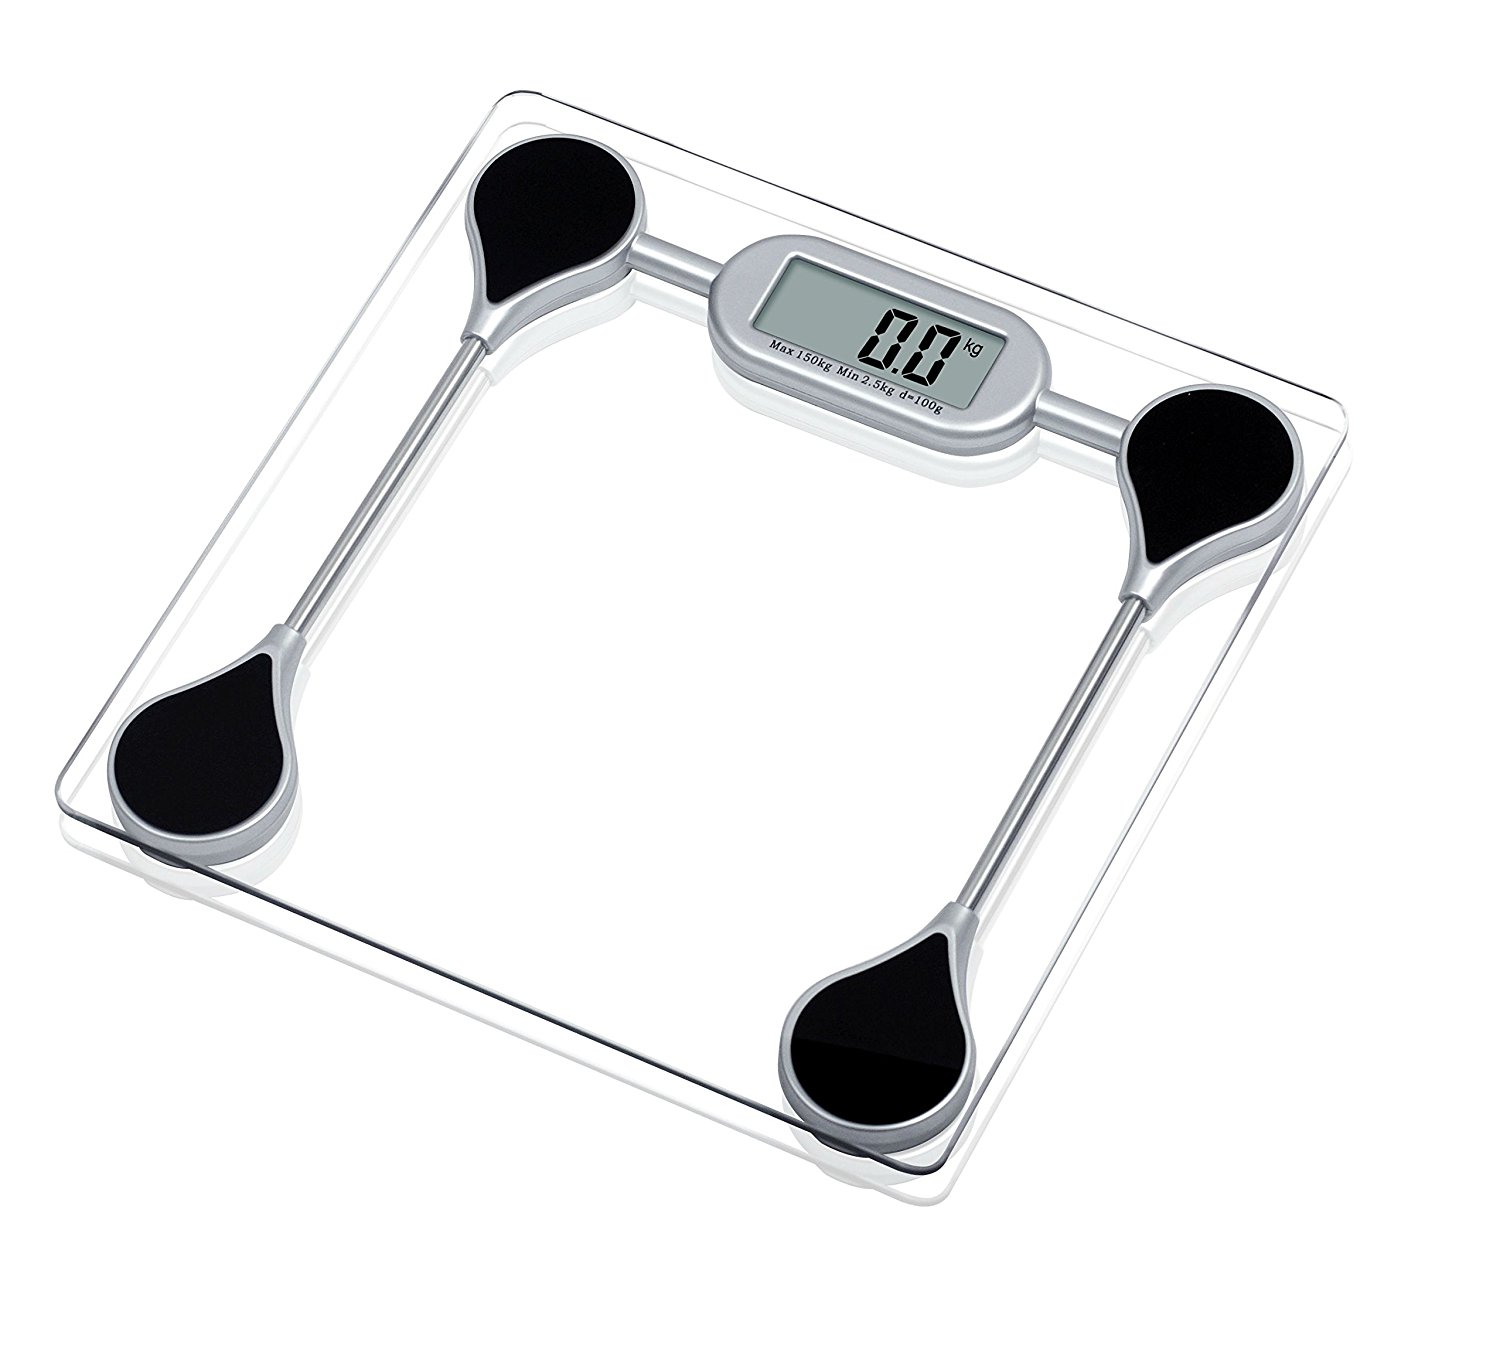 Venus Digital Body Weight Personal Weighing Scale (Transparent ...